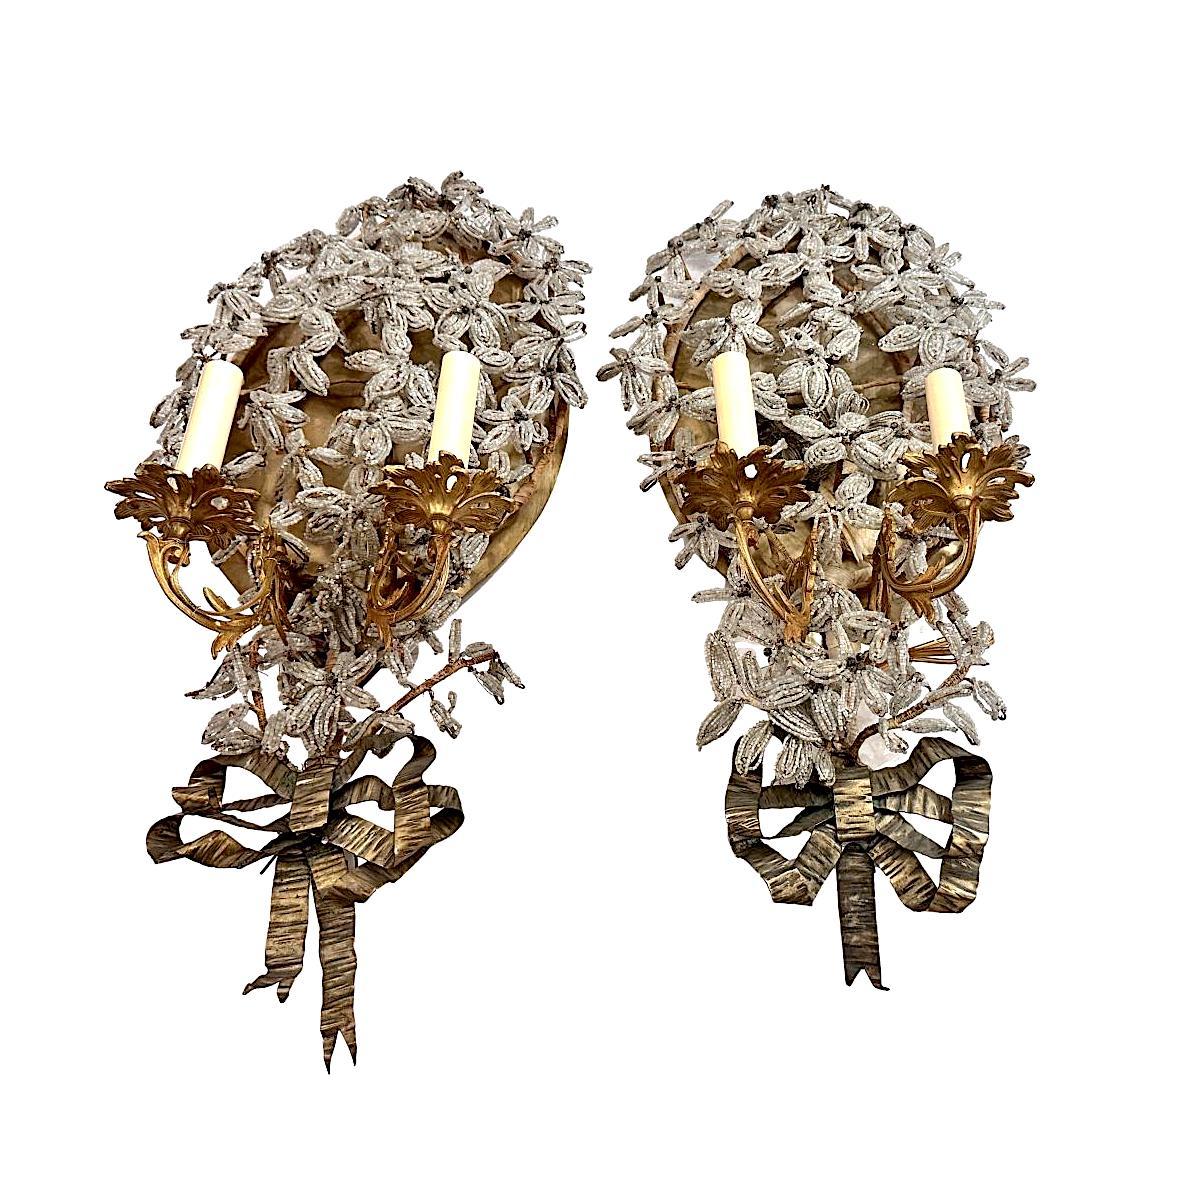 Pair of 19th Century bronze sconces with beaded crystal foliage.

Measurements:
Height: 28